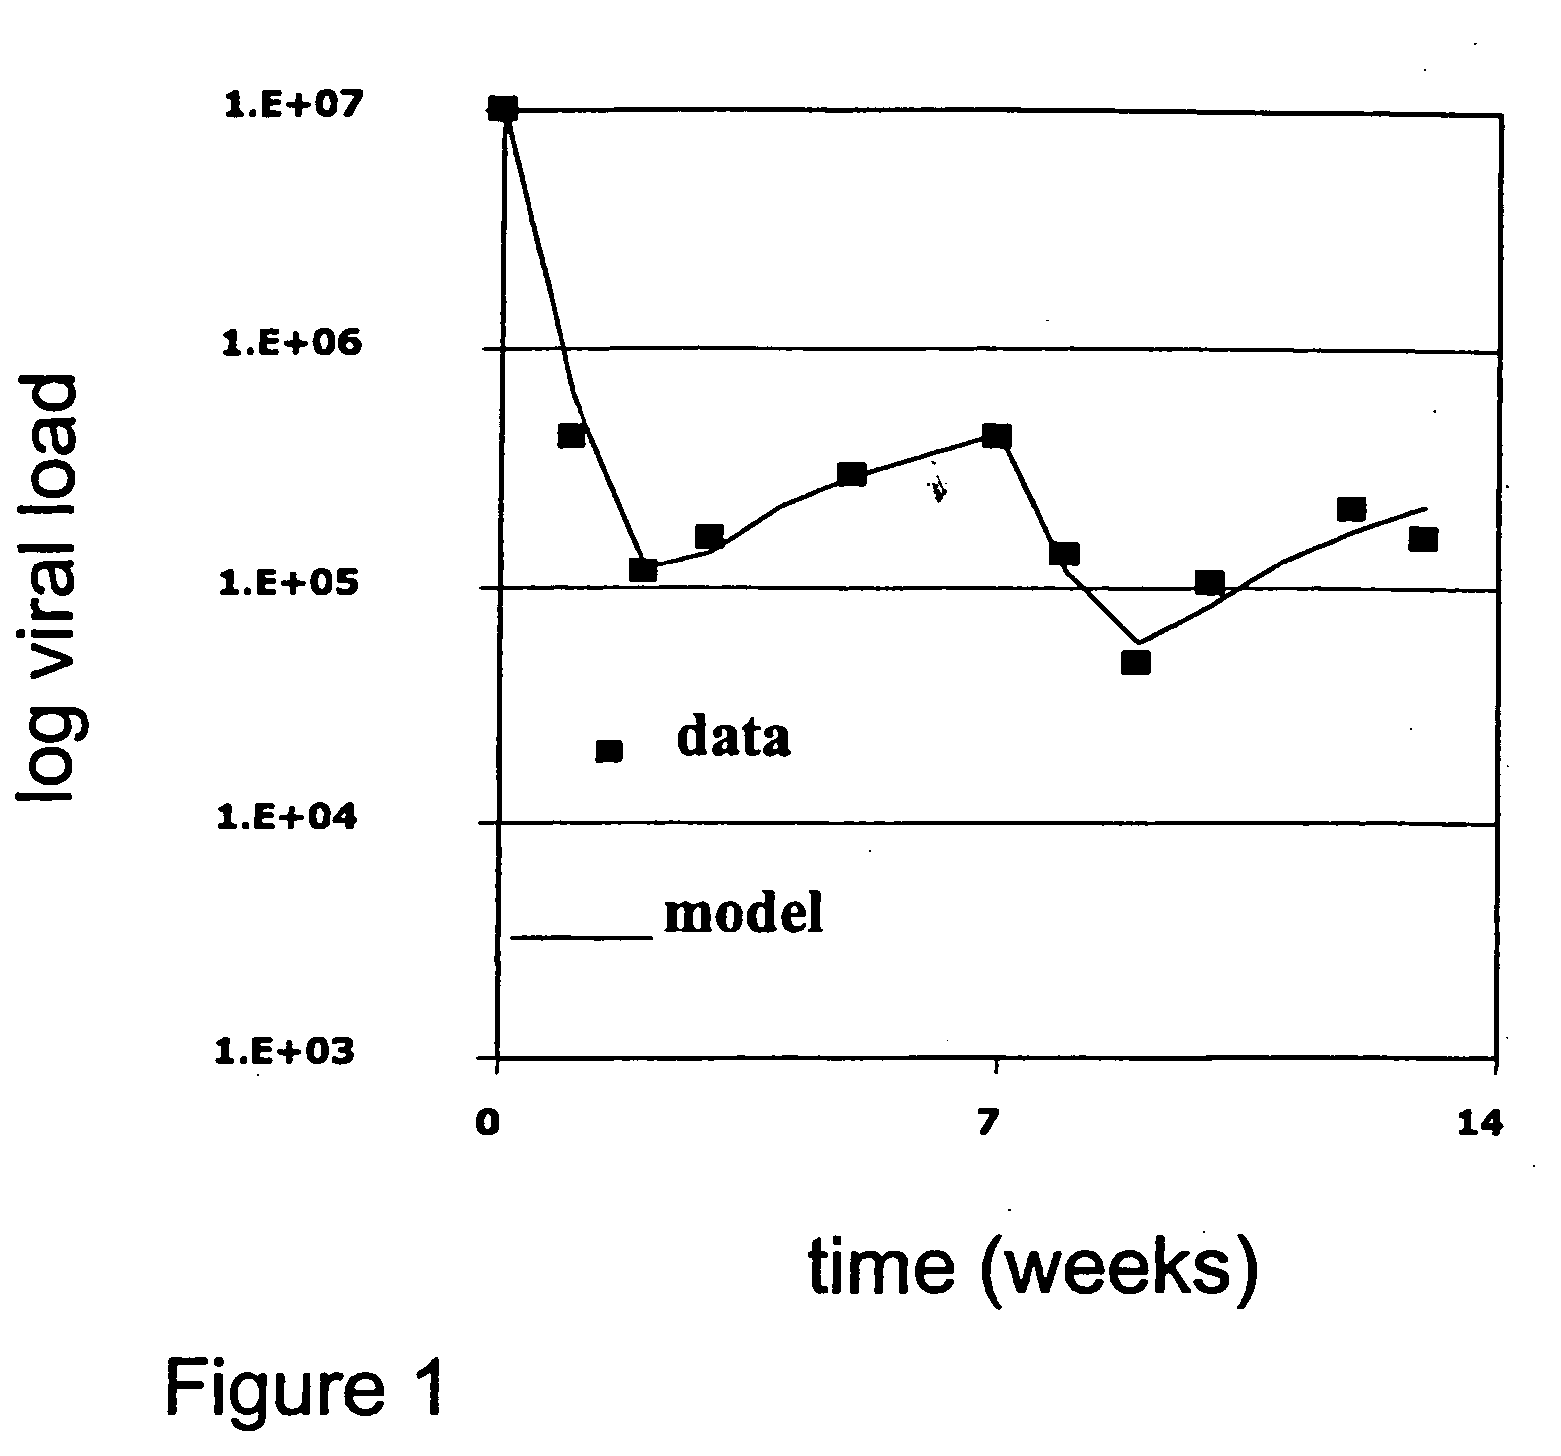 Method for modulating activity of HCV protease through use of a novel HCV protease inhibitor to reduce duration of treatment period